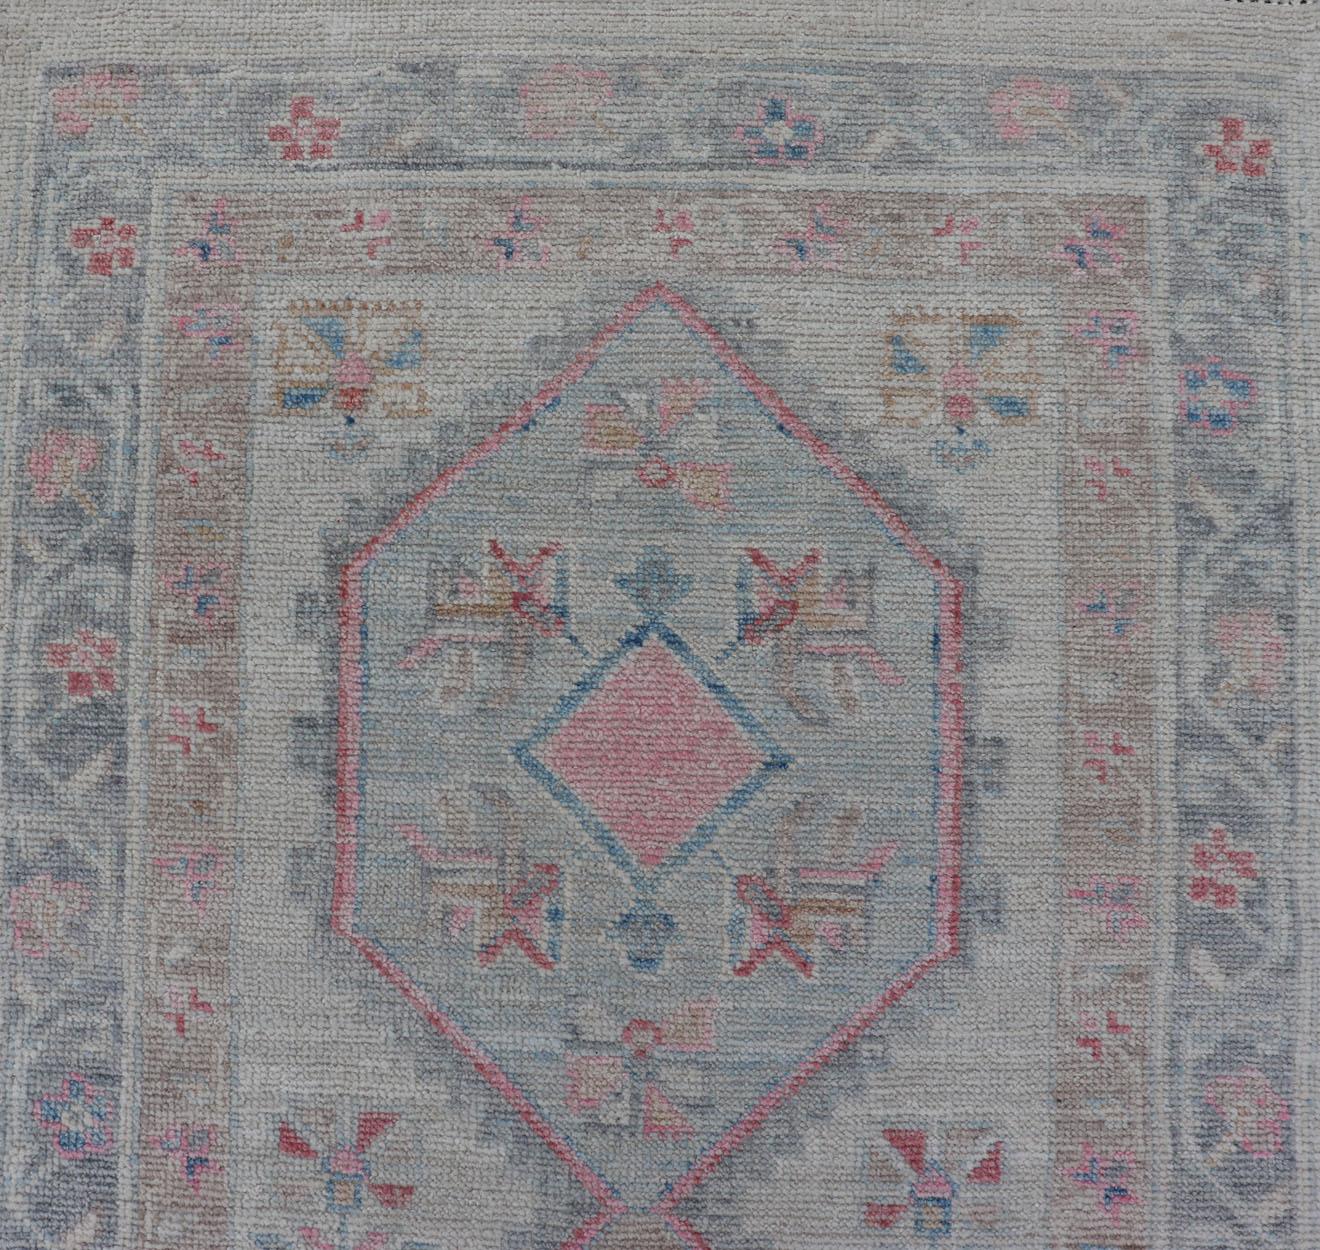 Modern oushak runner with cream background and floral medallions Keivan Woven Arts; rug AWR-4039 country of origin: Afghanistan Type: Oushak circa 2010
Measures: 2'8 x 8'2
Modern Oushak runner showcases the distinct large scale angular floral